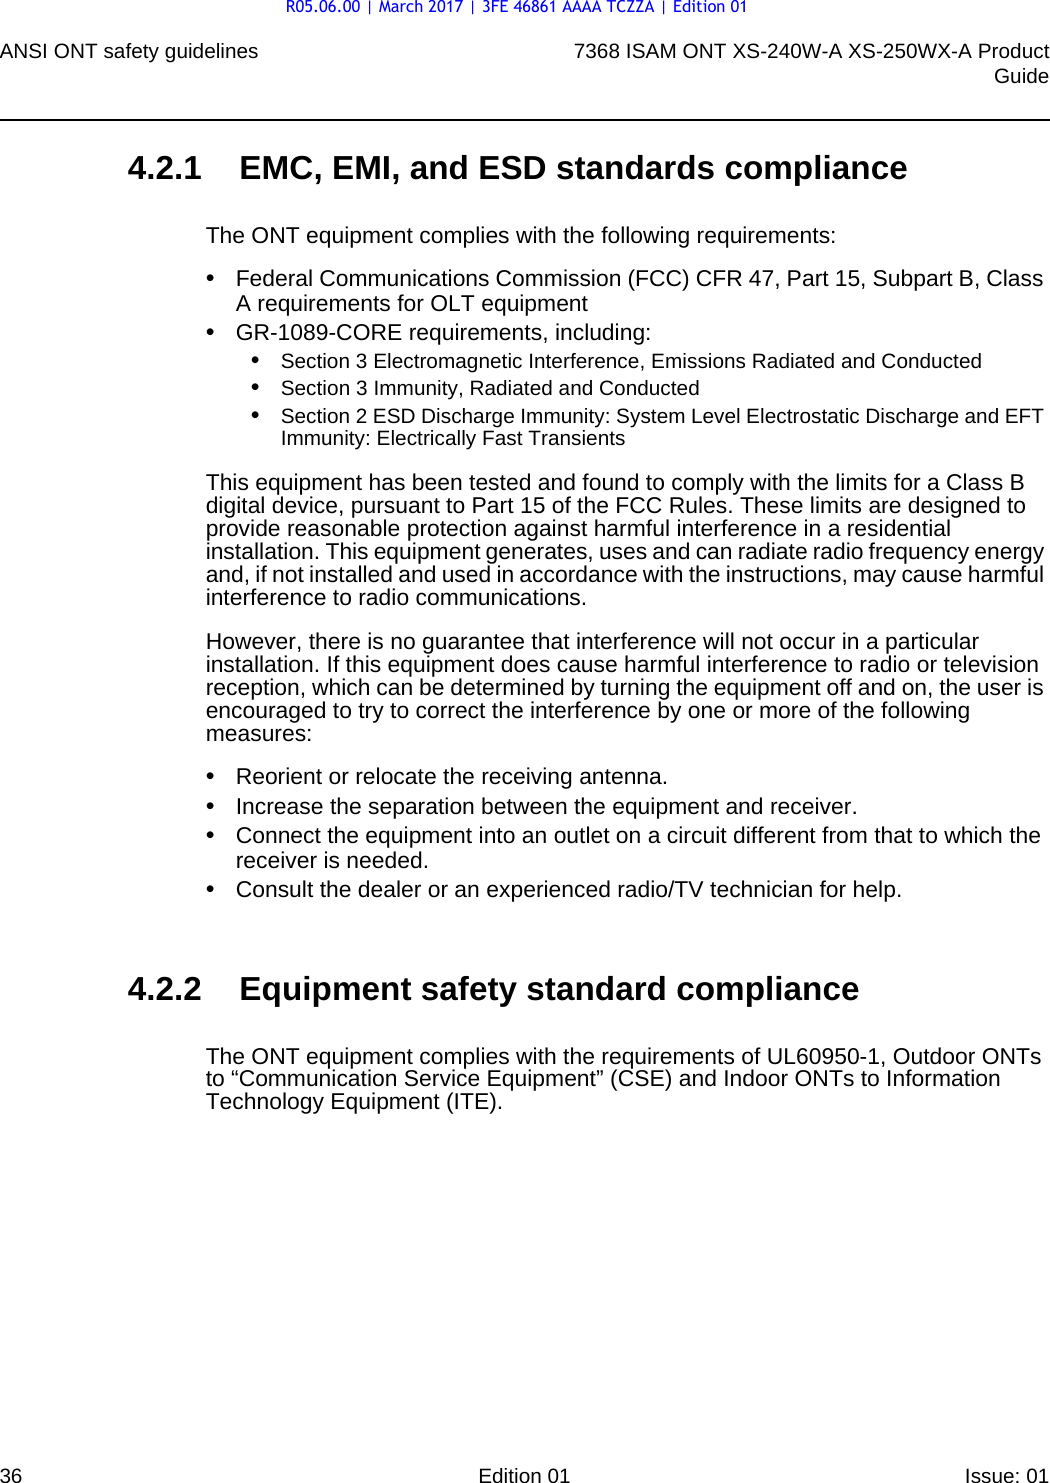 ANSI ONT safety guidelines367368 ISAM ONT XS-240W-A XS-250WX-A ProductGuideEdition 01 Issue: 01 4.2.1 EMC, EMI, and ESD standards complianceThe ONT equipment complies with the following requirements:•Federal Communications Commission (FCC) CFR 47, Part 15, Subpart B, Class A requirements for OLT equipment•GR-1089-CORE requirements, including:•Section 3 Electromagnetic Interference, Emissions Radiated and Conducted•Section 3 Immunity, Radiated and Conducted•Section 2 ESD Discharge Immunity: System Level Electrostatic Discharge and EFT Immunity: Electrically Fast TransientsThis equipment has been tested and found to comply with the limits for a Class B digital device, pursuant to Part 15 of the FCC Rules. These limits are designed to provide reasonable protection against harmful interference in a residential installation. This equipment generates, uses and can radiate radio frequency energy and, if not installed and used in accordance with the instructions, may cause harmful interference to radio communications.However, there is no guarantee that interference will not occur in a particular installation. If this equipment does cause harmful interference to radio or television reception, which can be determined by turning the equipment off and on, the user is encouraged to try to correct the interference by one or more of the following measures:•Reorient or relocate the receiving antenna.•Increase the separation between the equipment and receiver.•Connect the equipment into an outlet on a circuit different from that to which the receiver is needed.•Consult the dealer or an experienced radio/TV technician for help.4.2.2 Equipment safety standard complianceThe ONT equipment complies with the requirements of UL60950-1, Outdoor ONTs to “Communication Service Equipment” (CSE) and Indoor ONTs to Information Technology Equipment (ITE).R05.06.00 | March 2017 | 3FE 46861 AAAA TCZZA | Edition 01